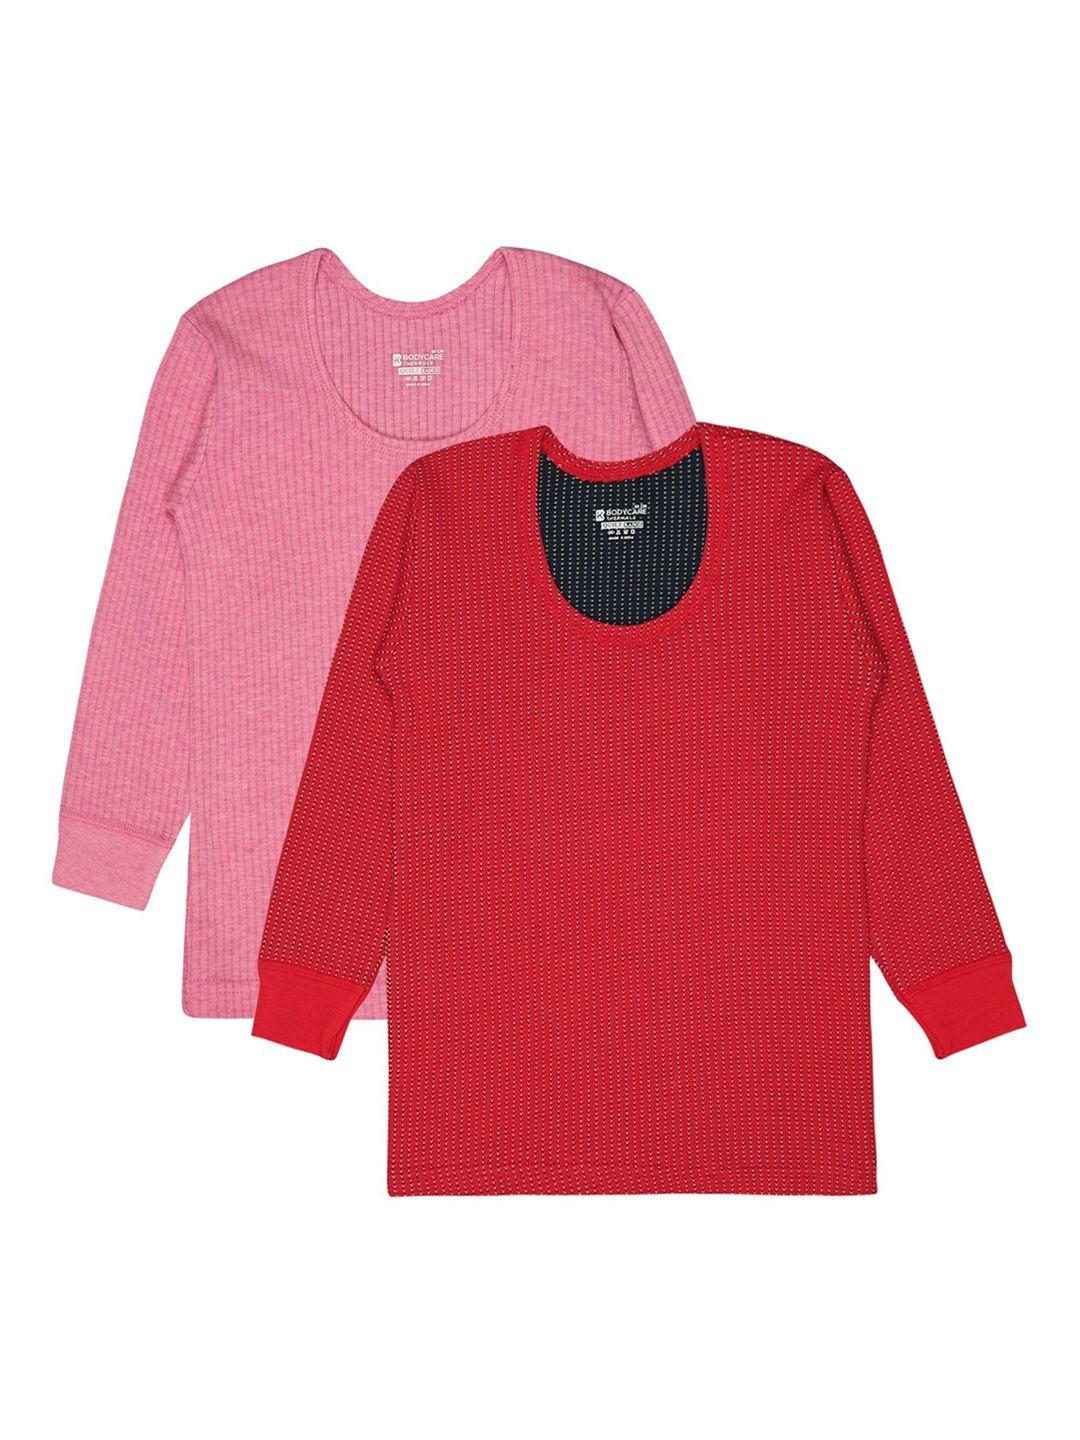 bodycare insider infants pack of 2 thermal tops